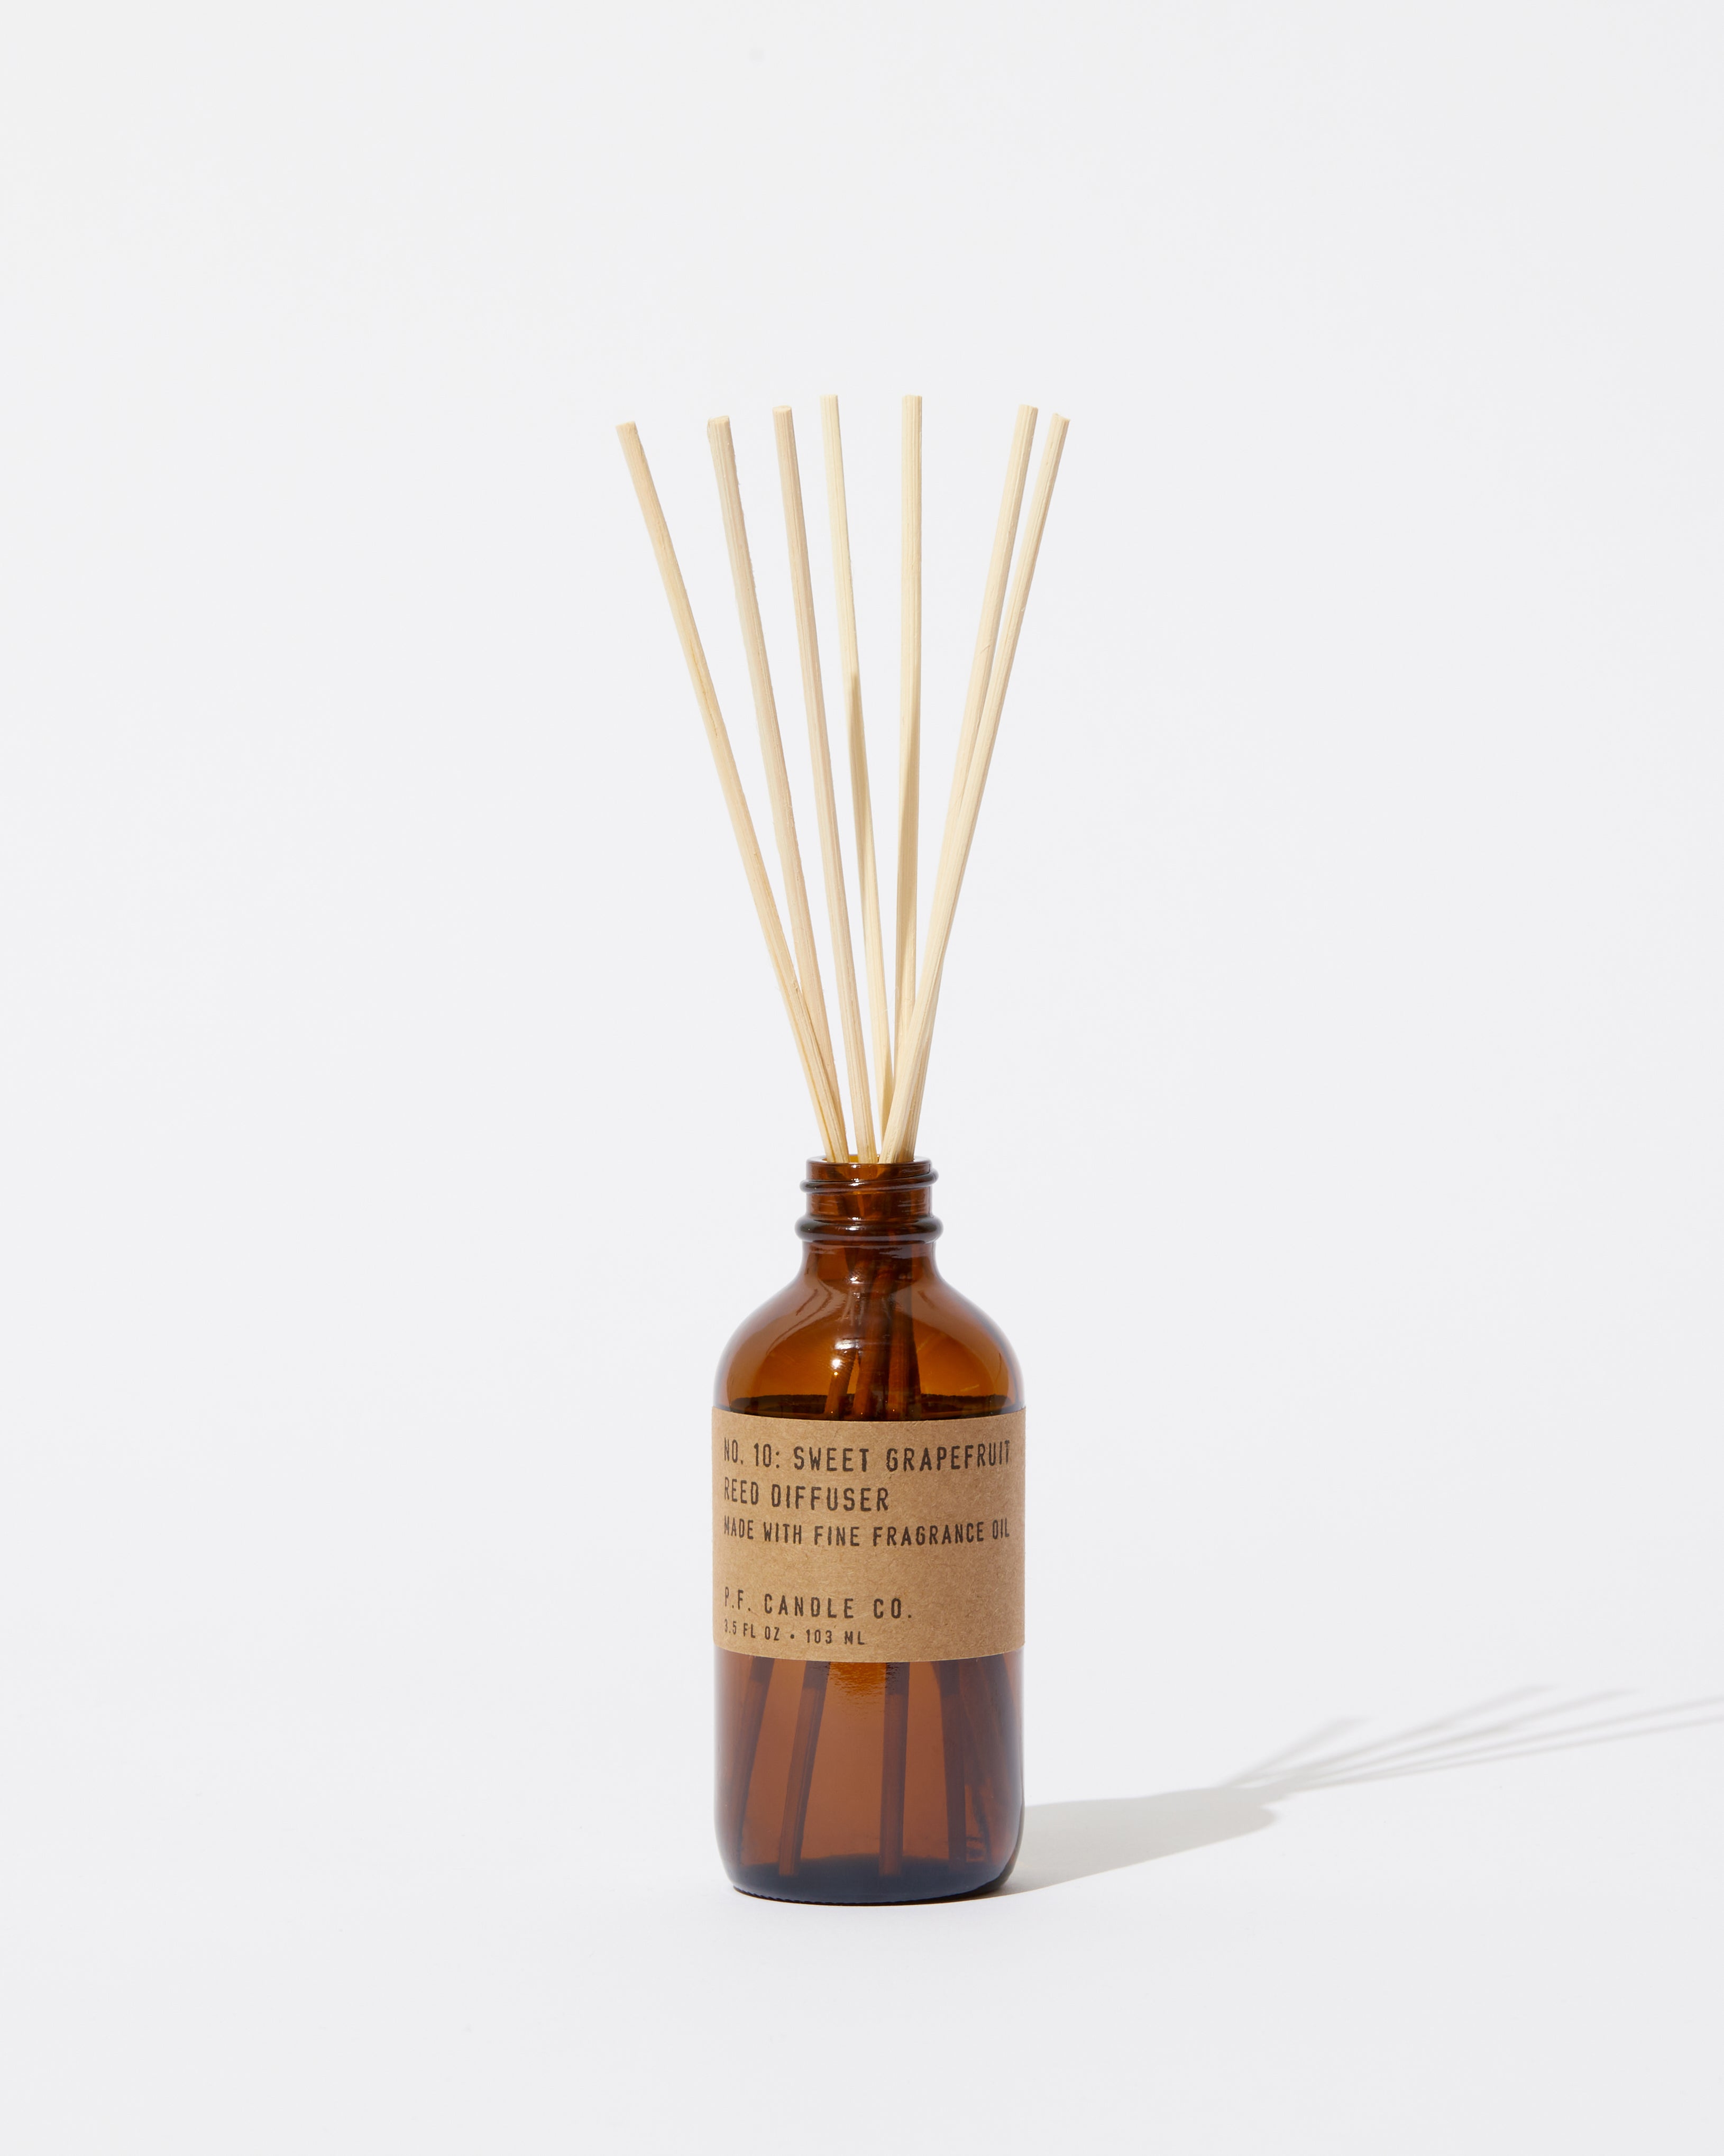 P.F Candle Co. | Reed Diffuser - Sweet grapefruit